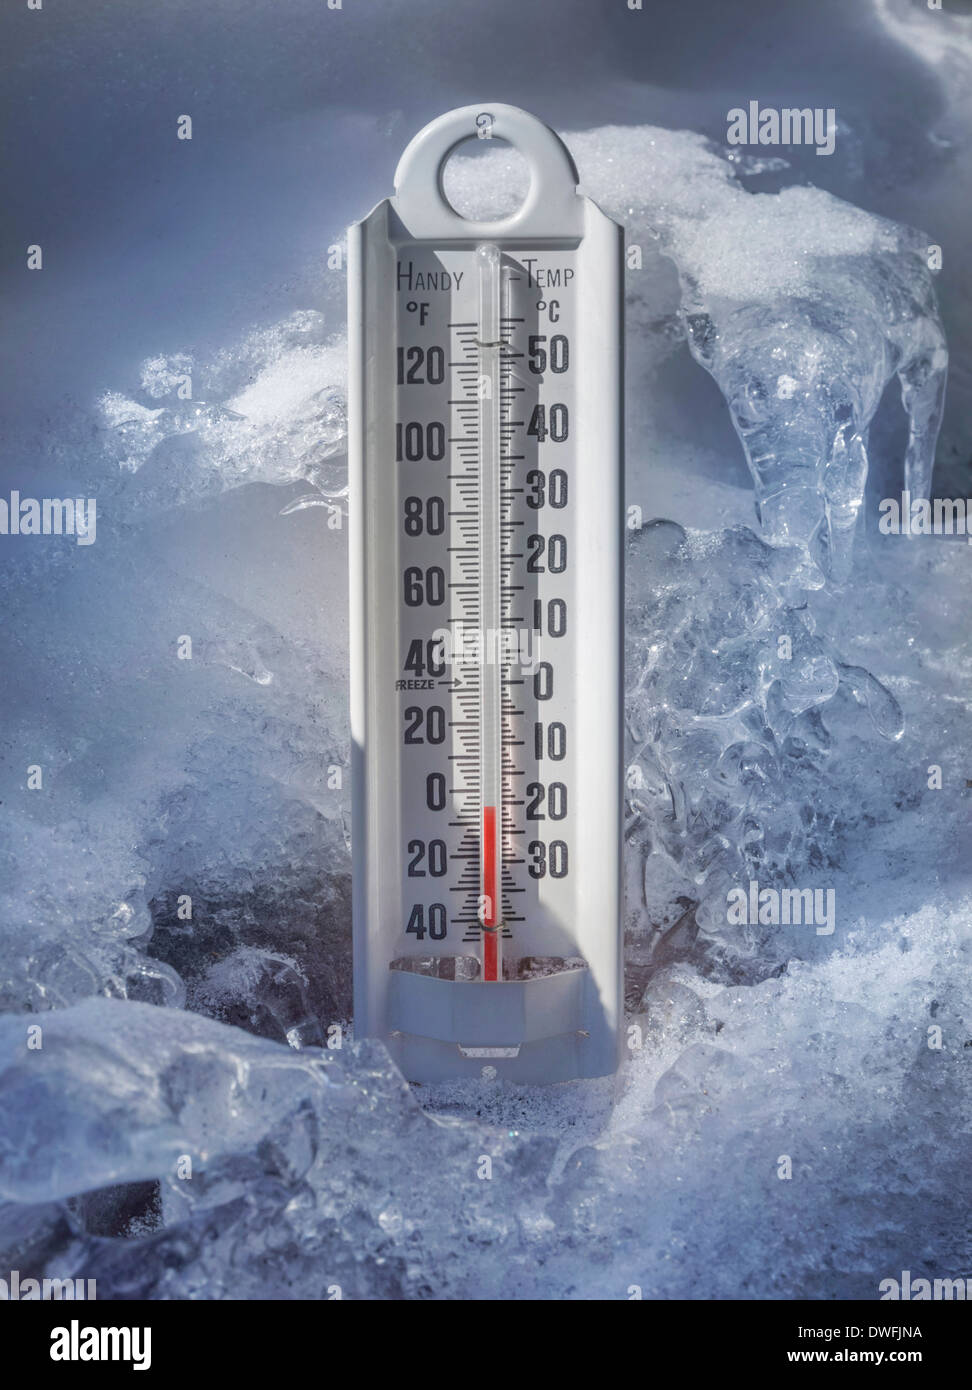 https://c8.alamy.com/comp/DWFJNA/ice-cold-thermometer-in-ice-and-snow-to-illustrate-global-warming-DWFJNA.jpg